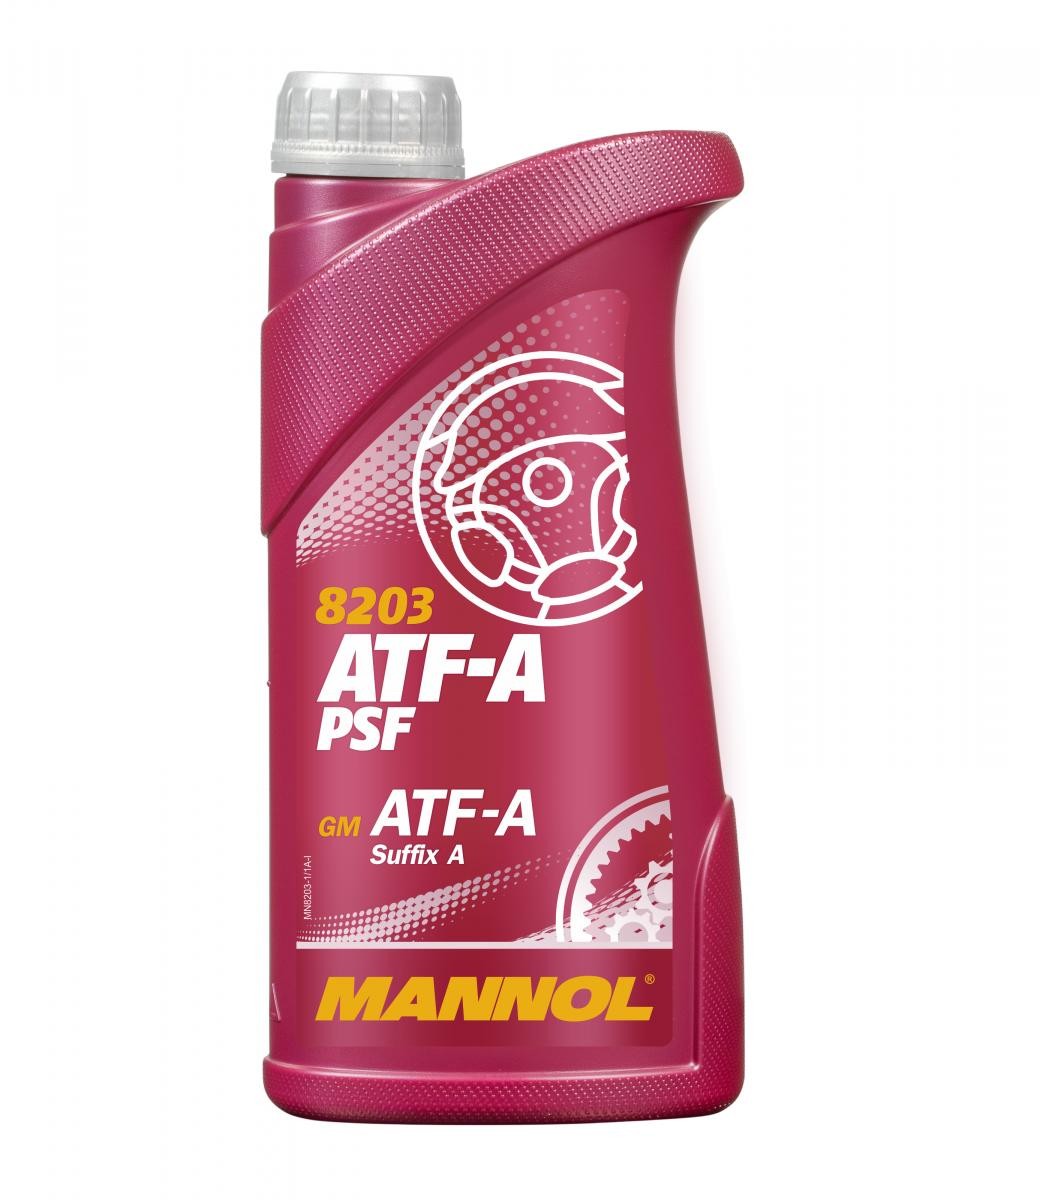 MANNOL ATF-A PSF ATF-A, 1l, red Automatic transmission oil MN8203-1 buy